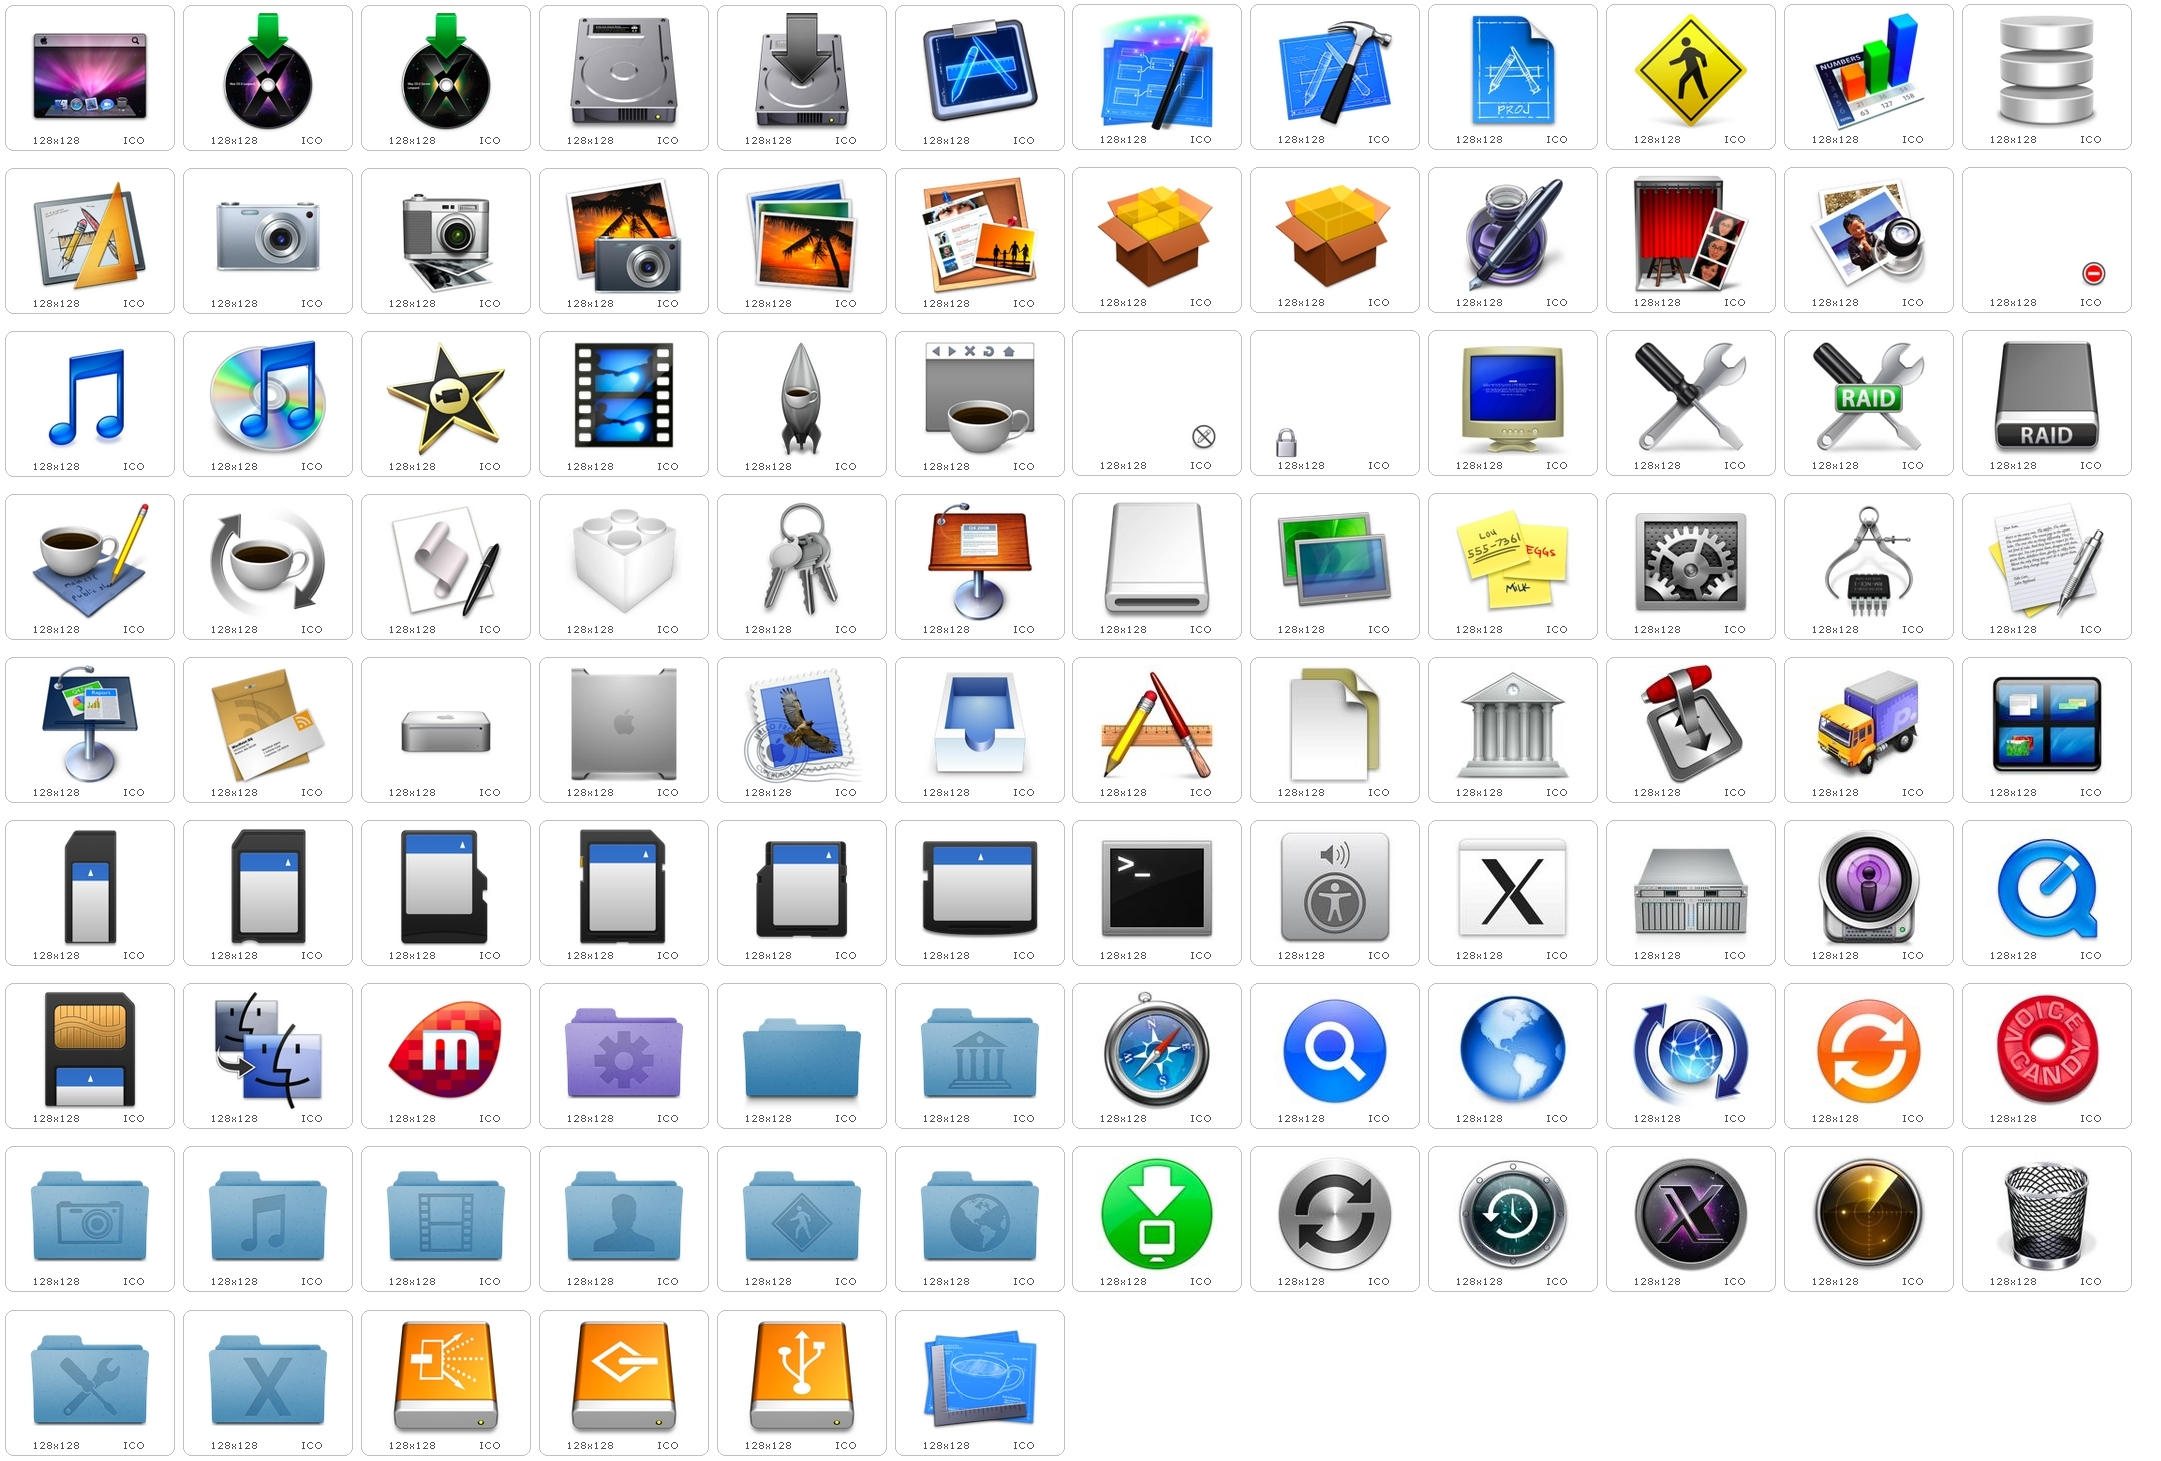 Leopard_Default_System_Icons_by_hjsergey